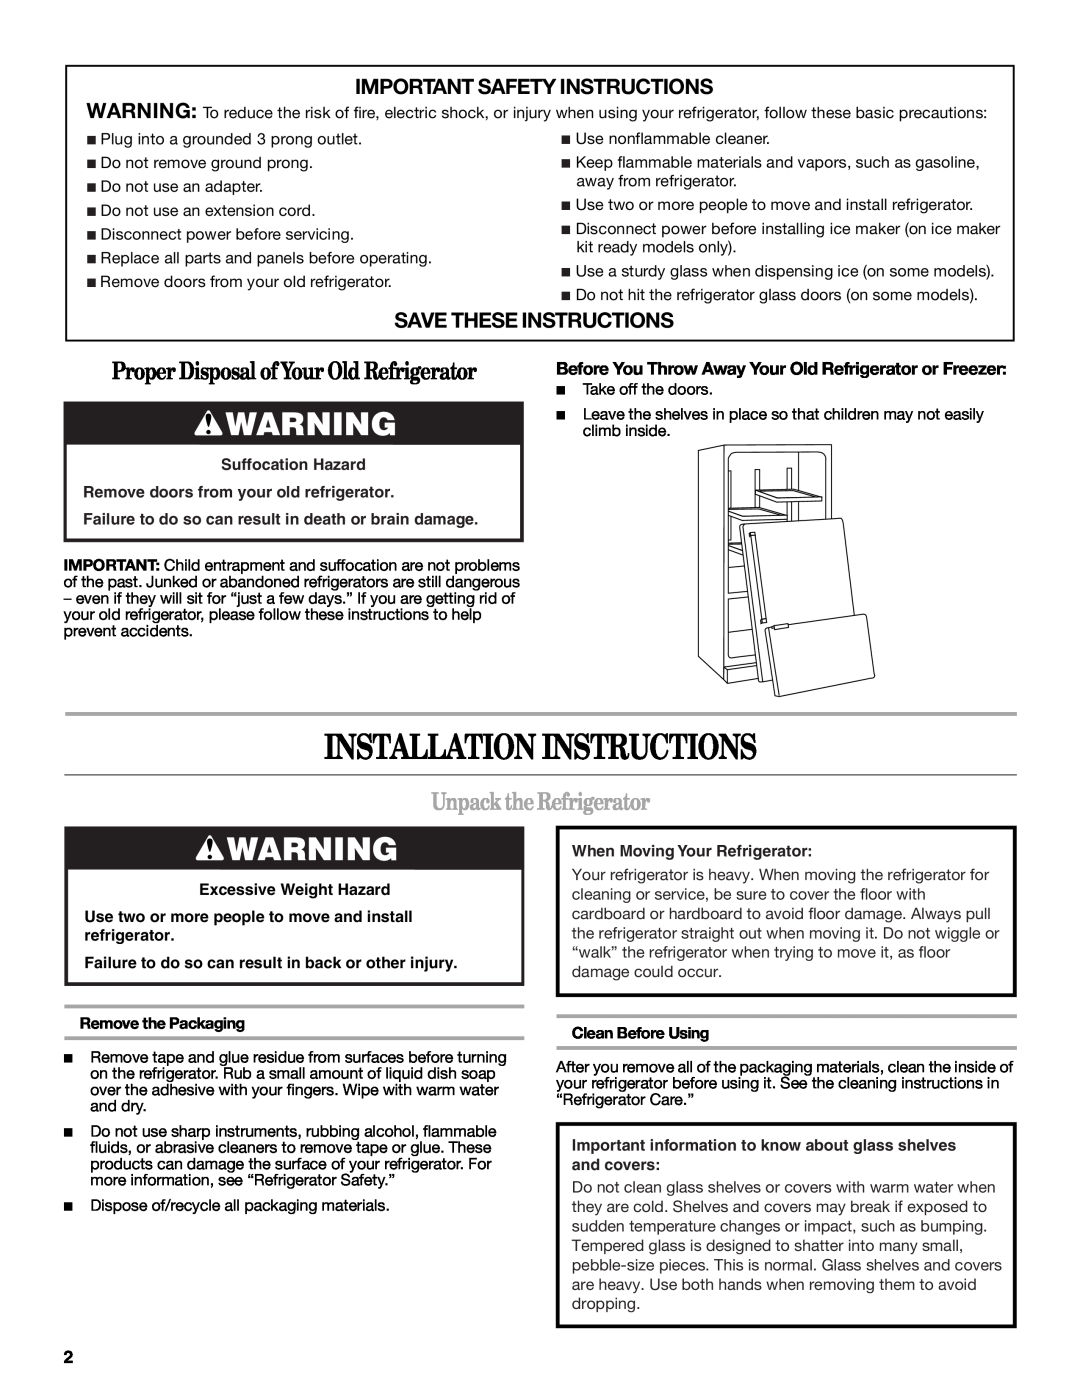 Whirlpool W10314956B Installation Instructions, Unpack the Refrigerator, Important Safety Instructions, Clean Before Using 